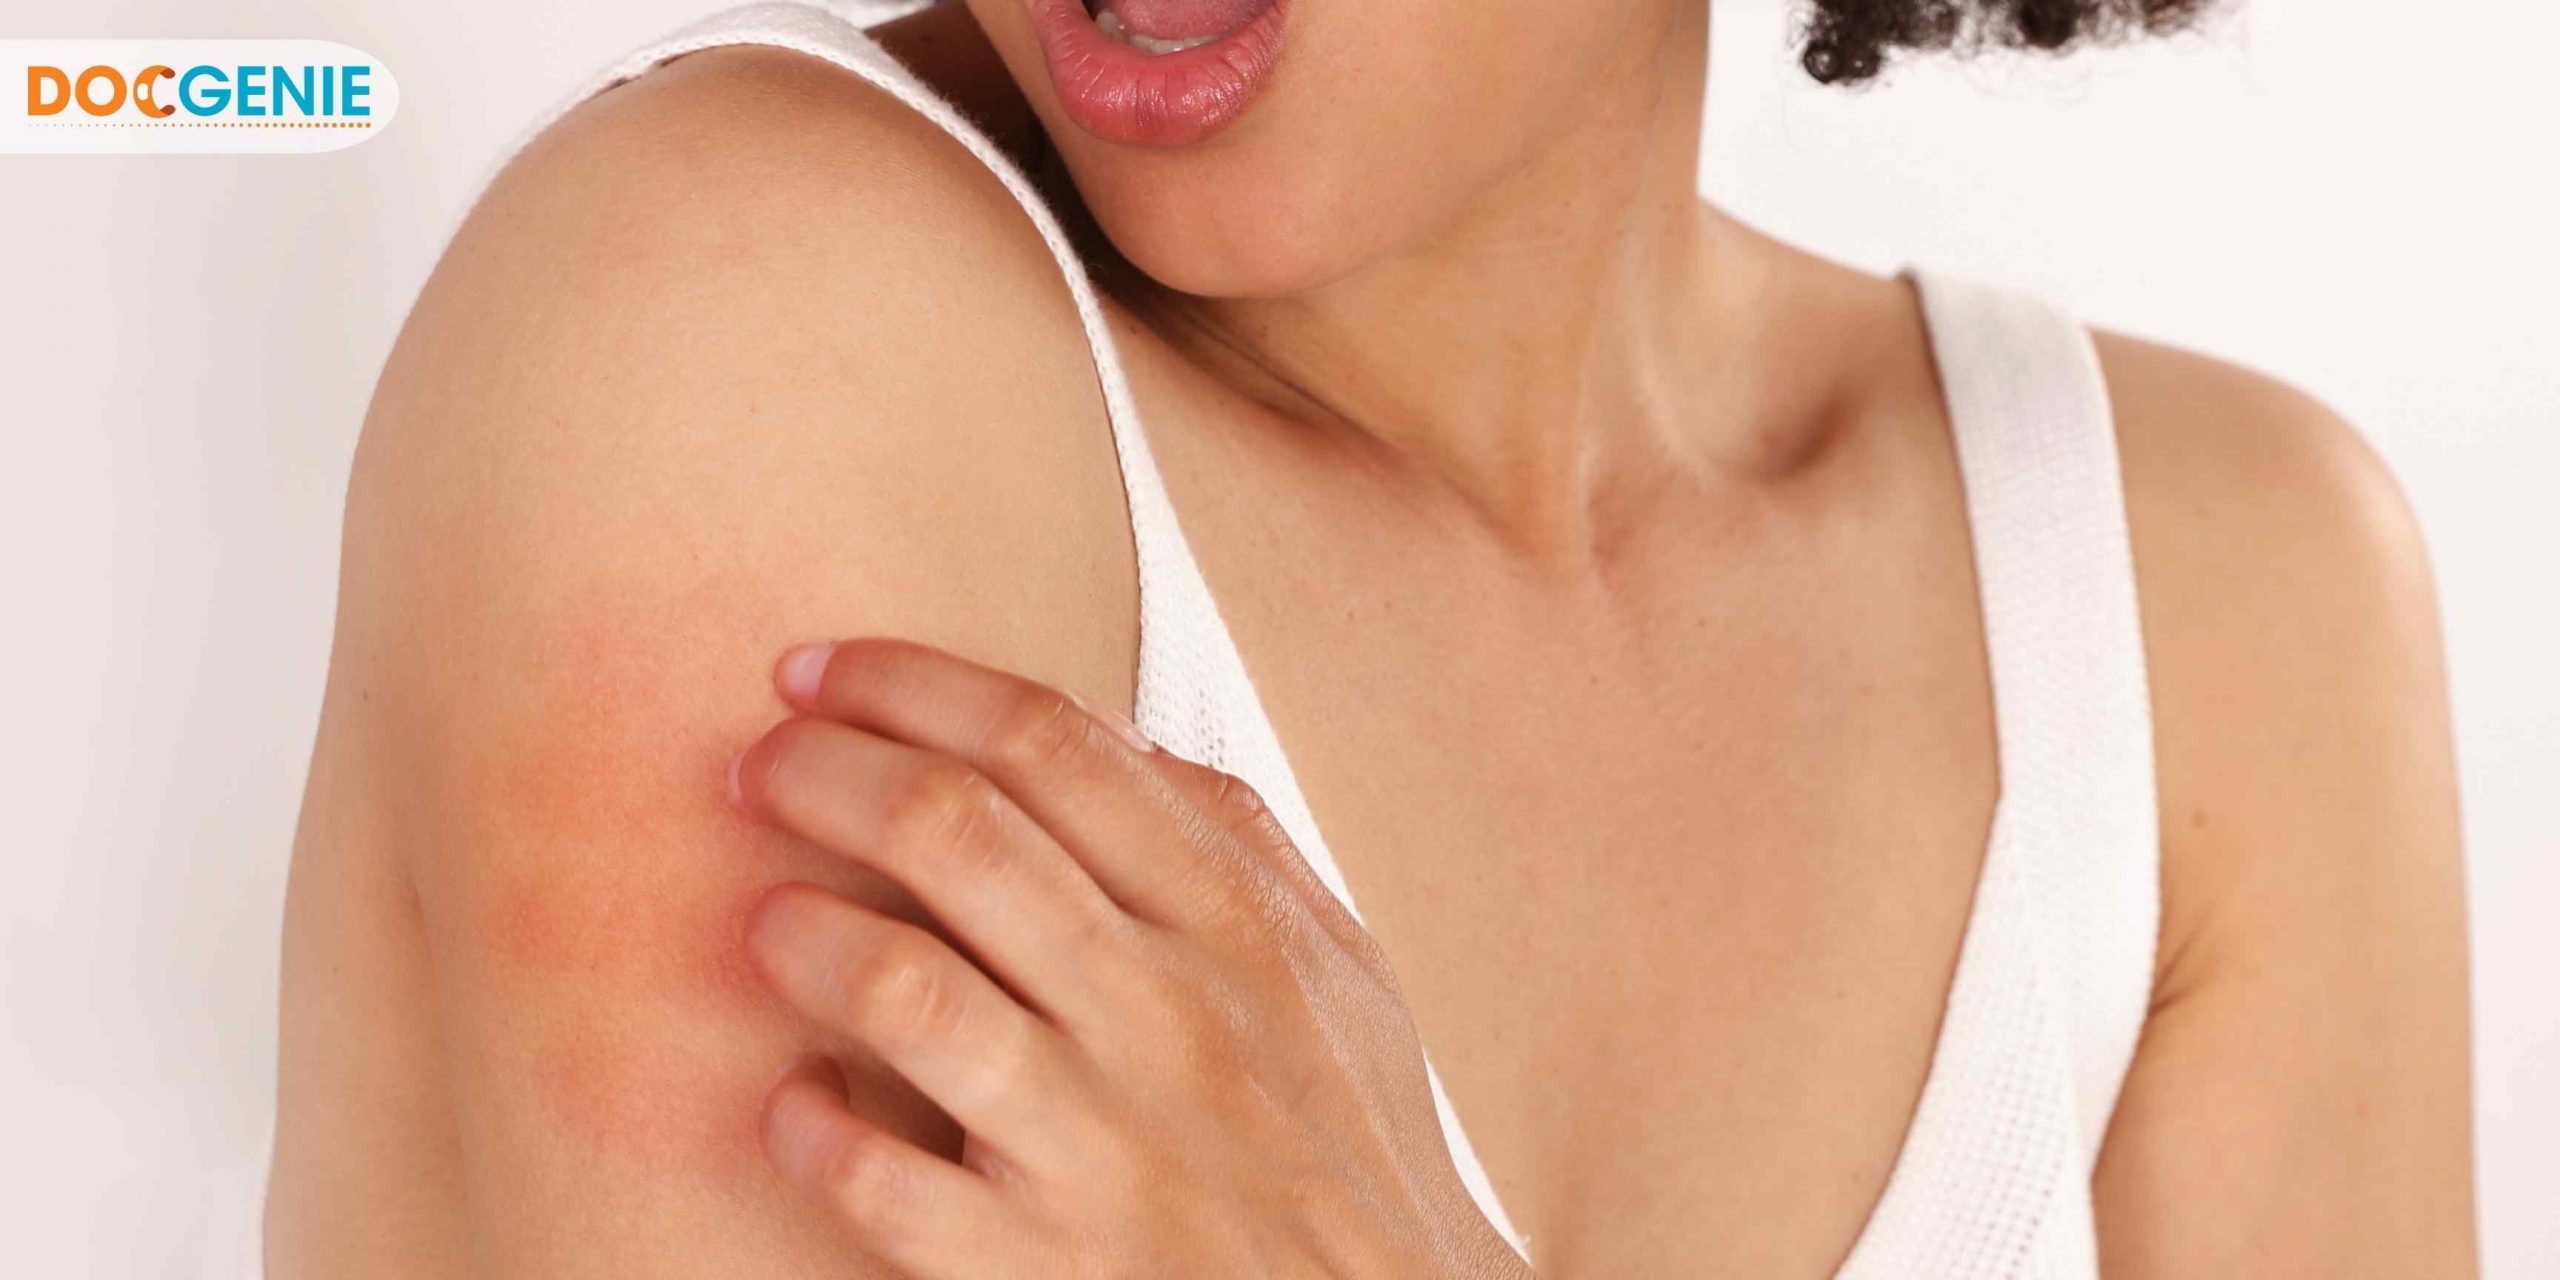 Do You Have Sensitive Skin? Keep These 10 Tips In Mind